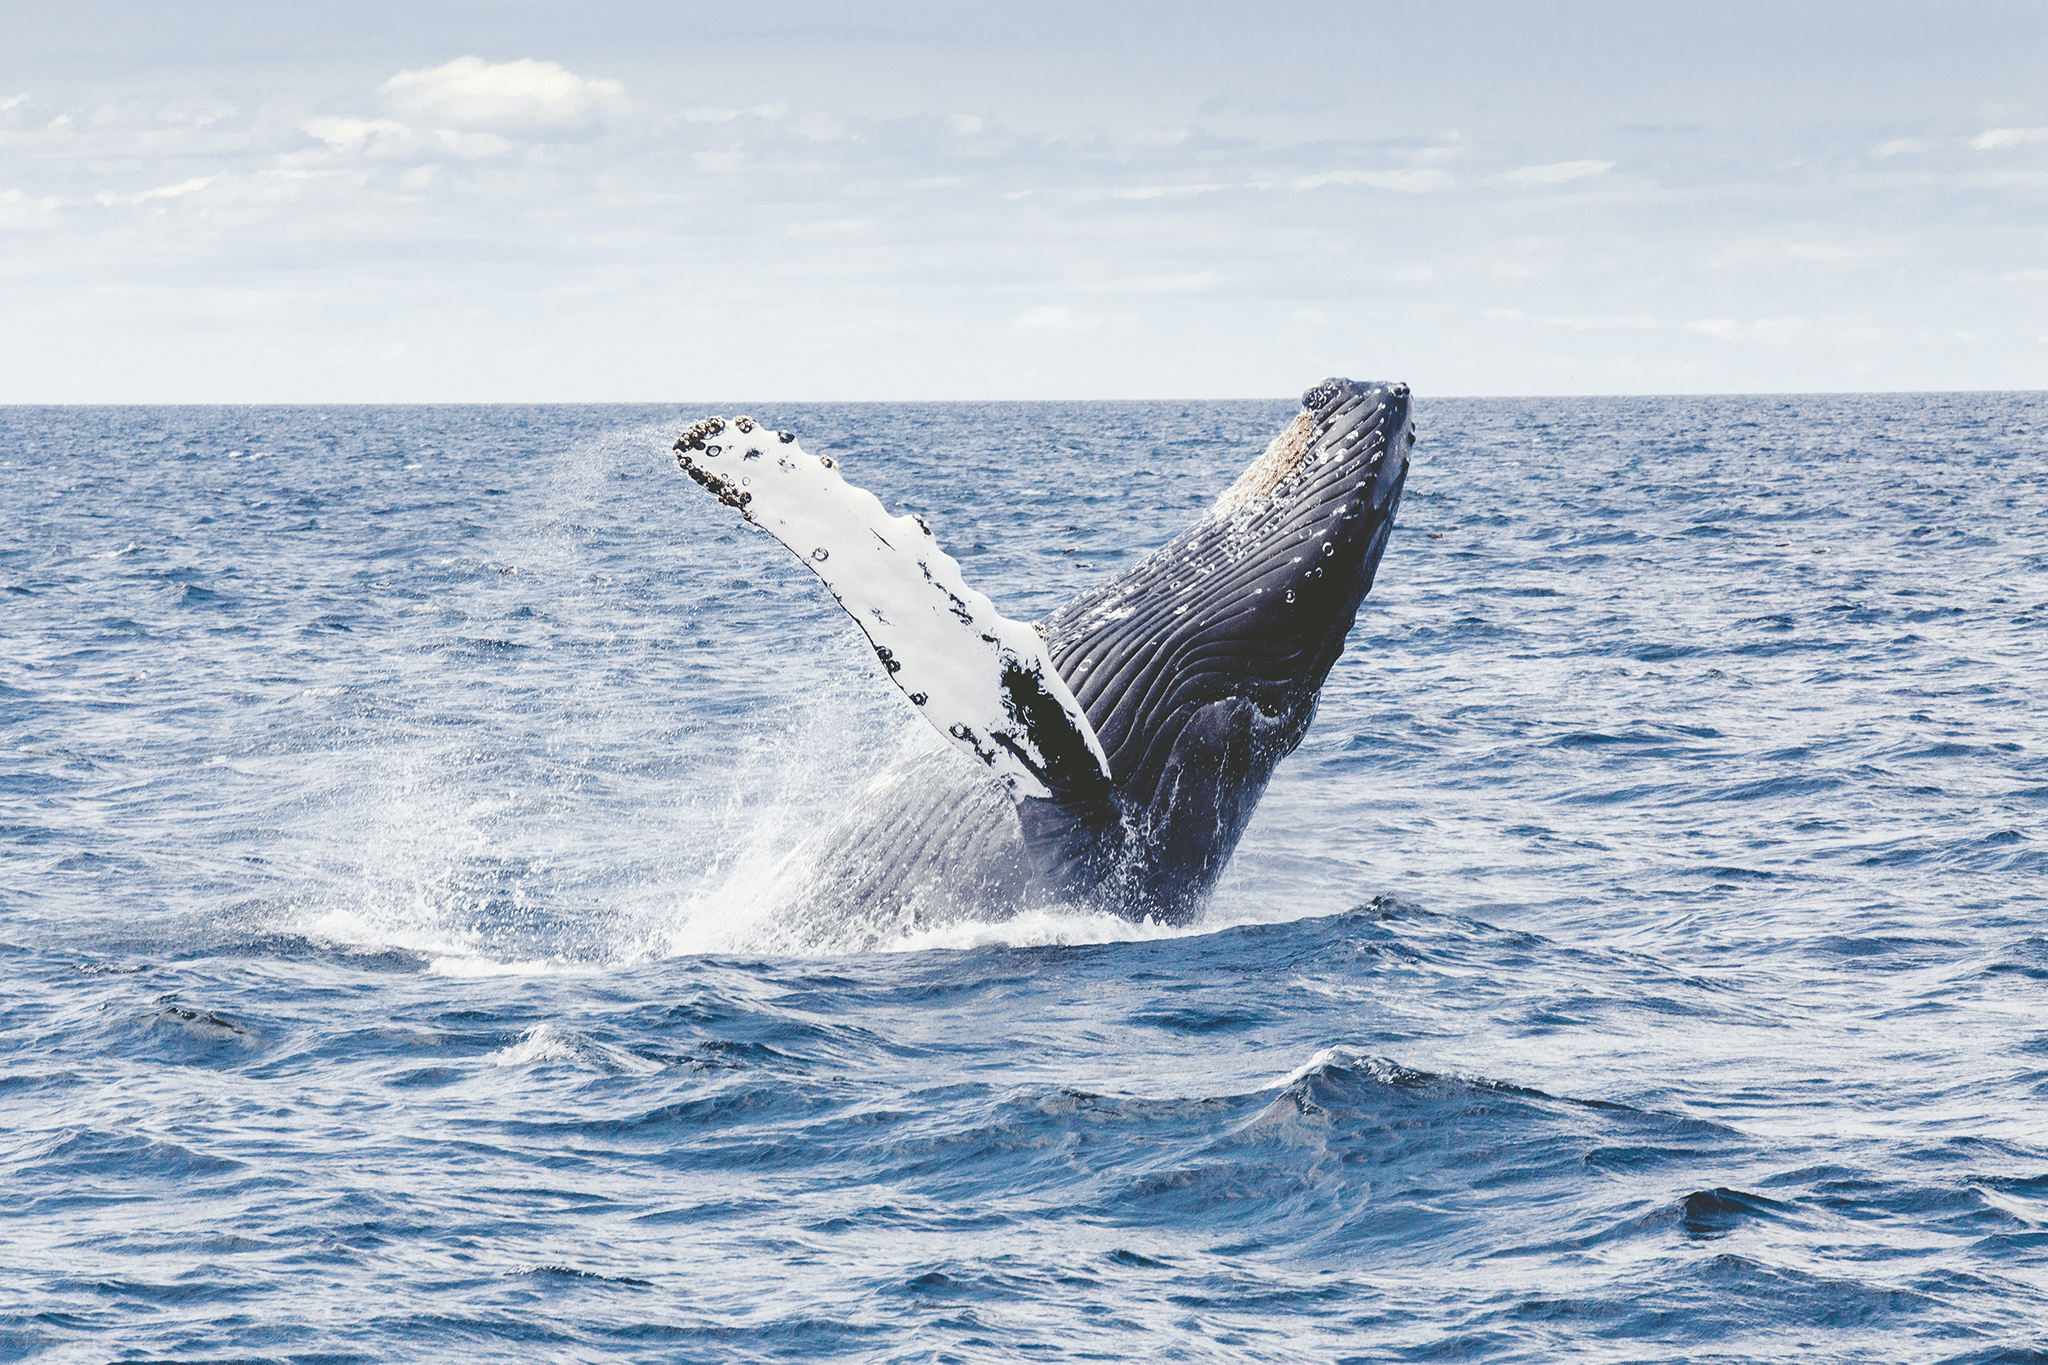 humpback whale jumping out of water.